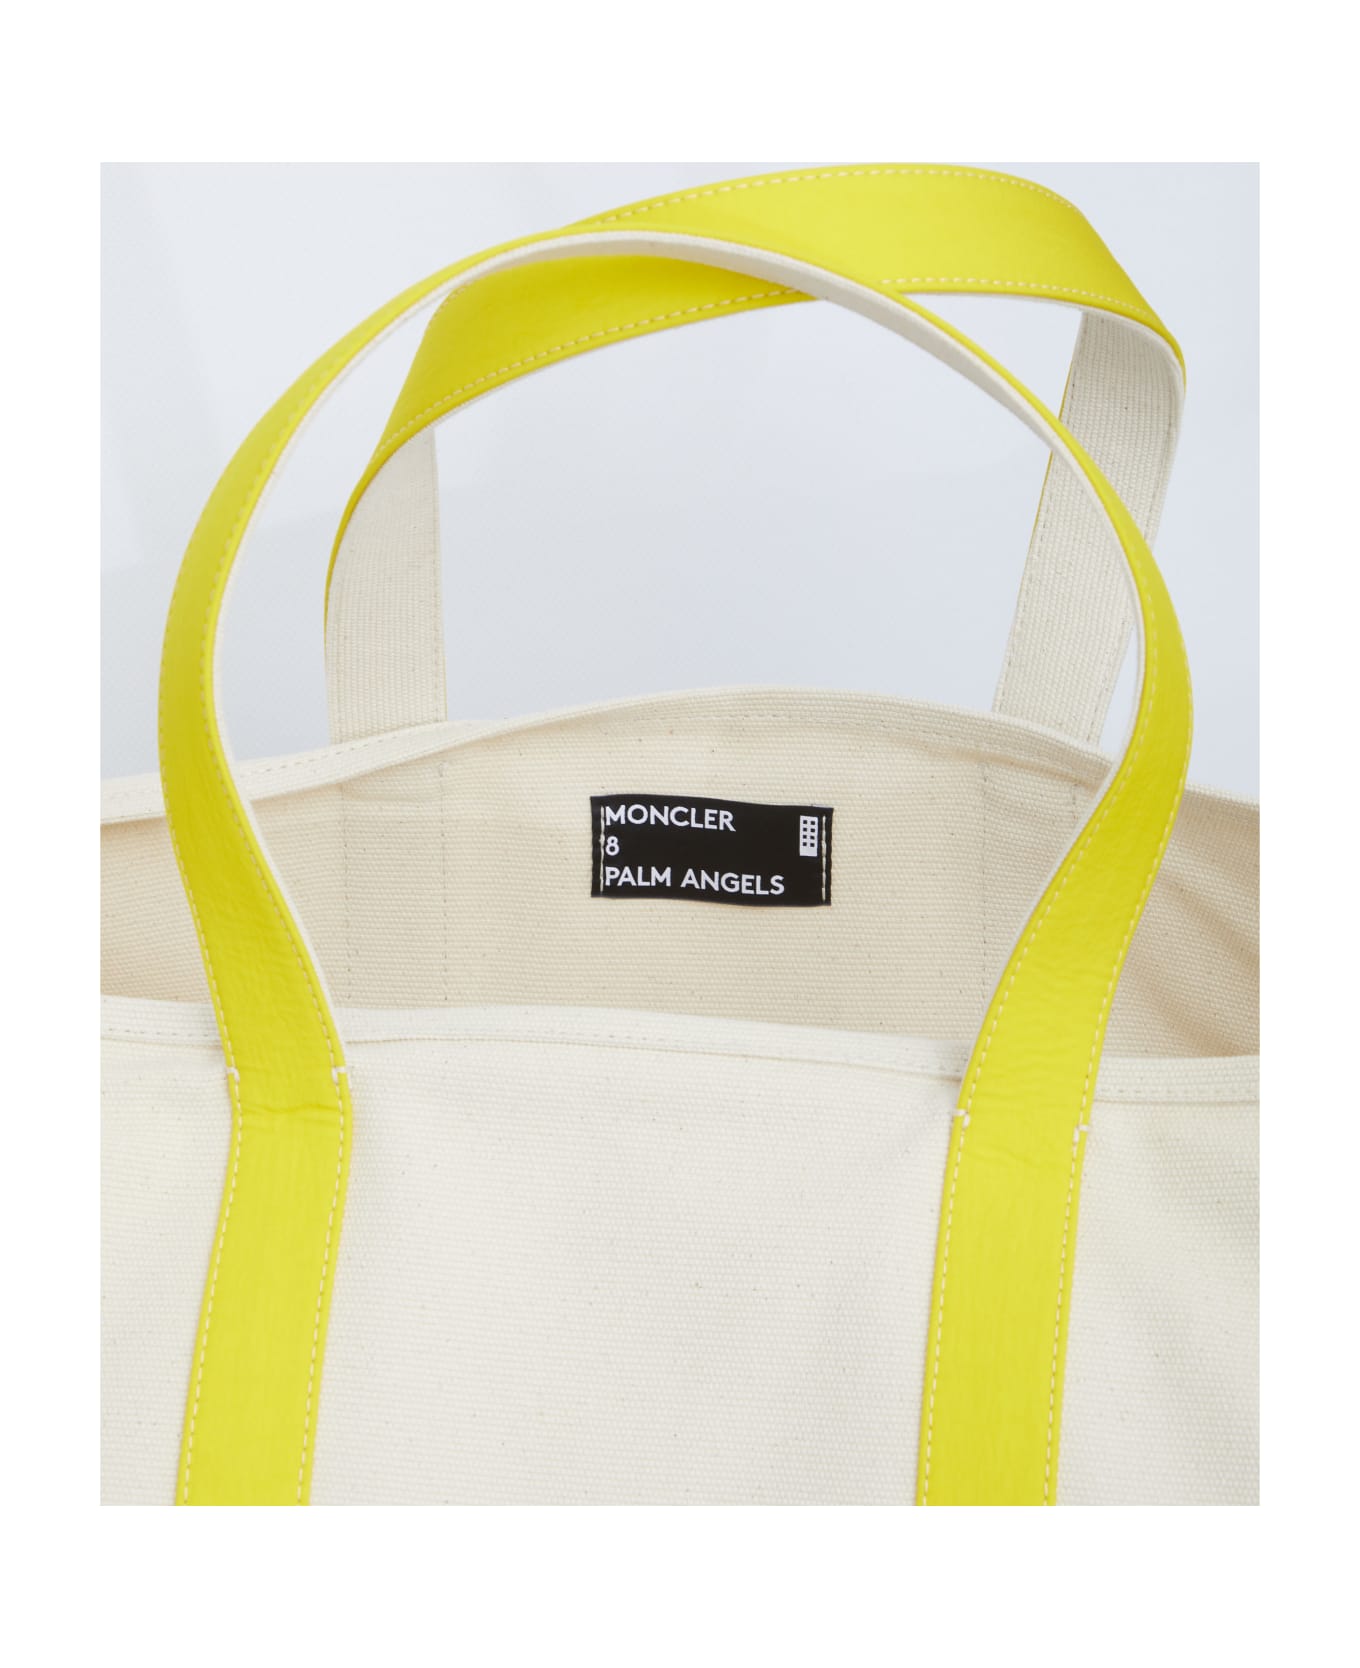 Moncler X Palm Angels Tote Bag - CREAM